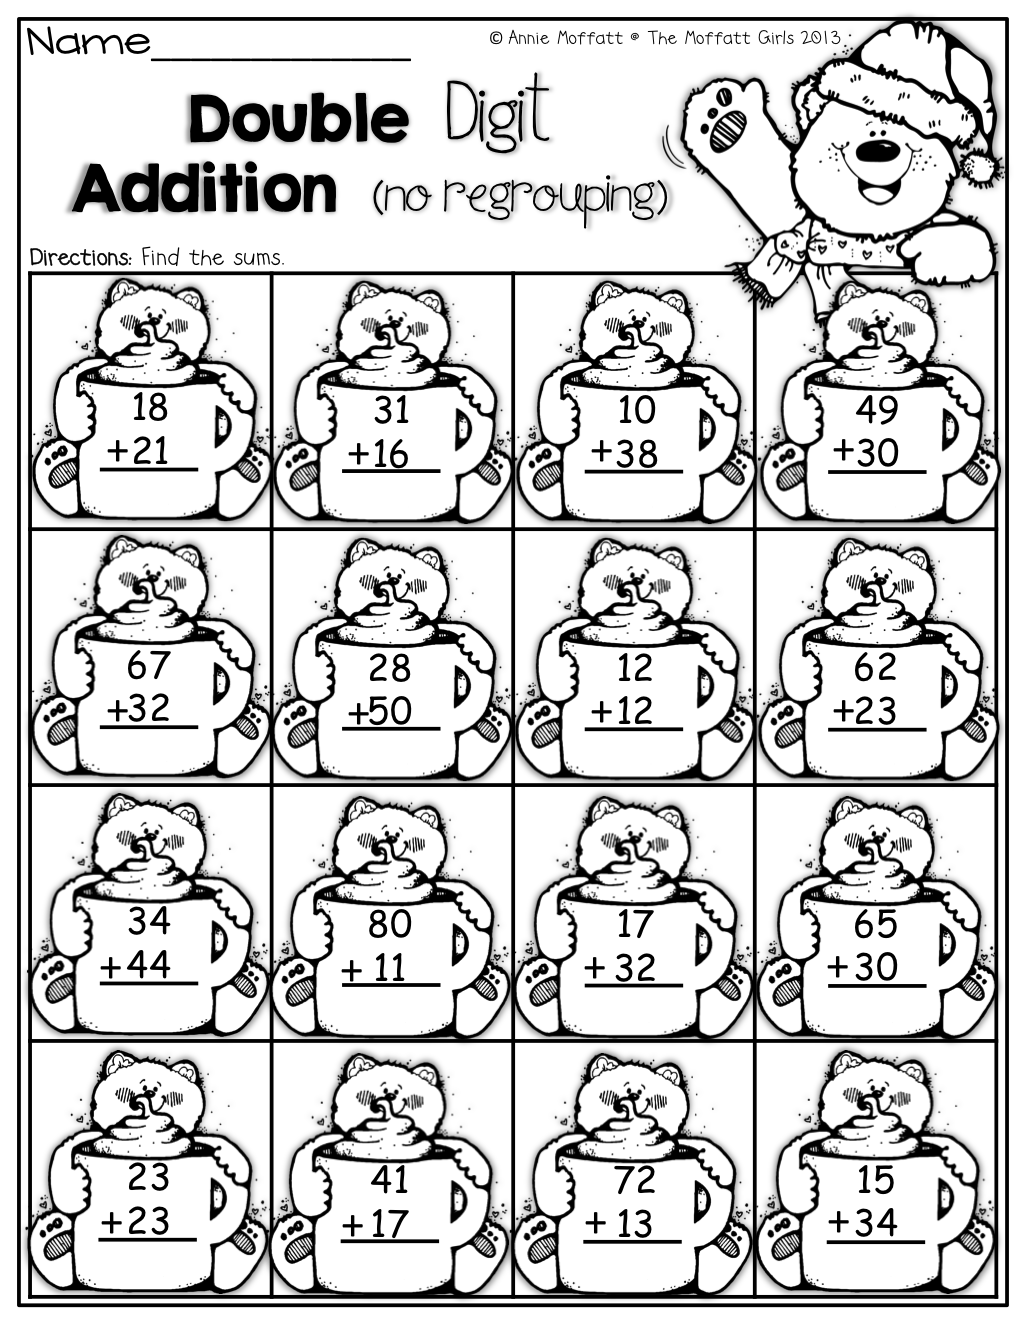 Double Digit Addition with no regrouping! | 1st Grade ...